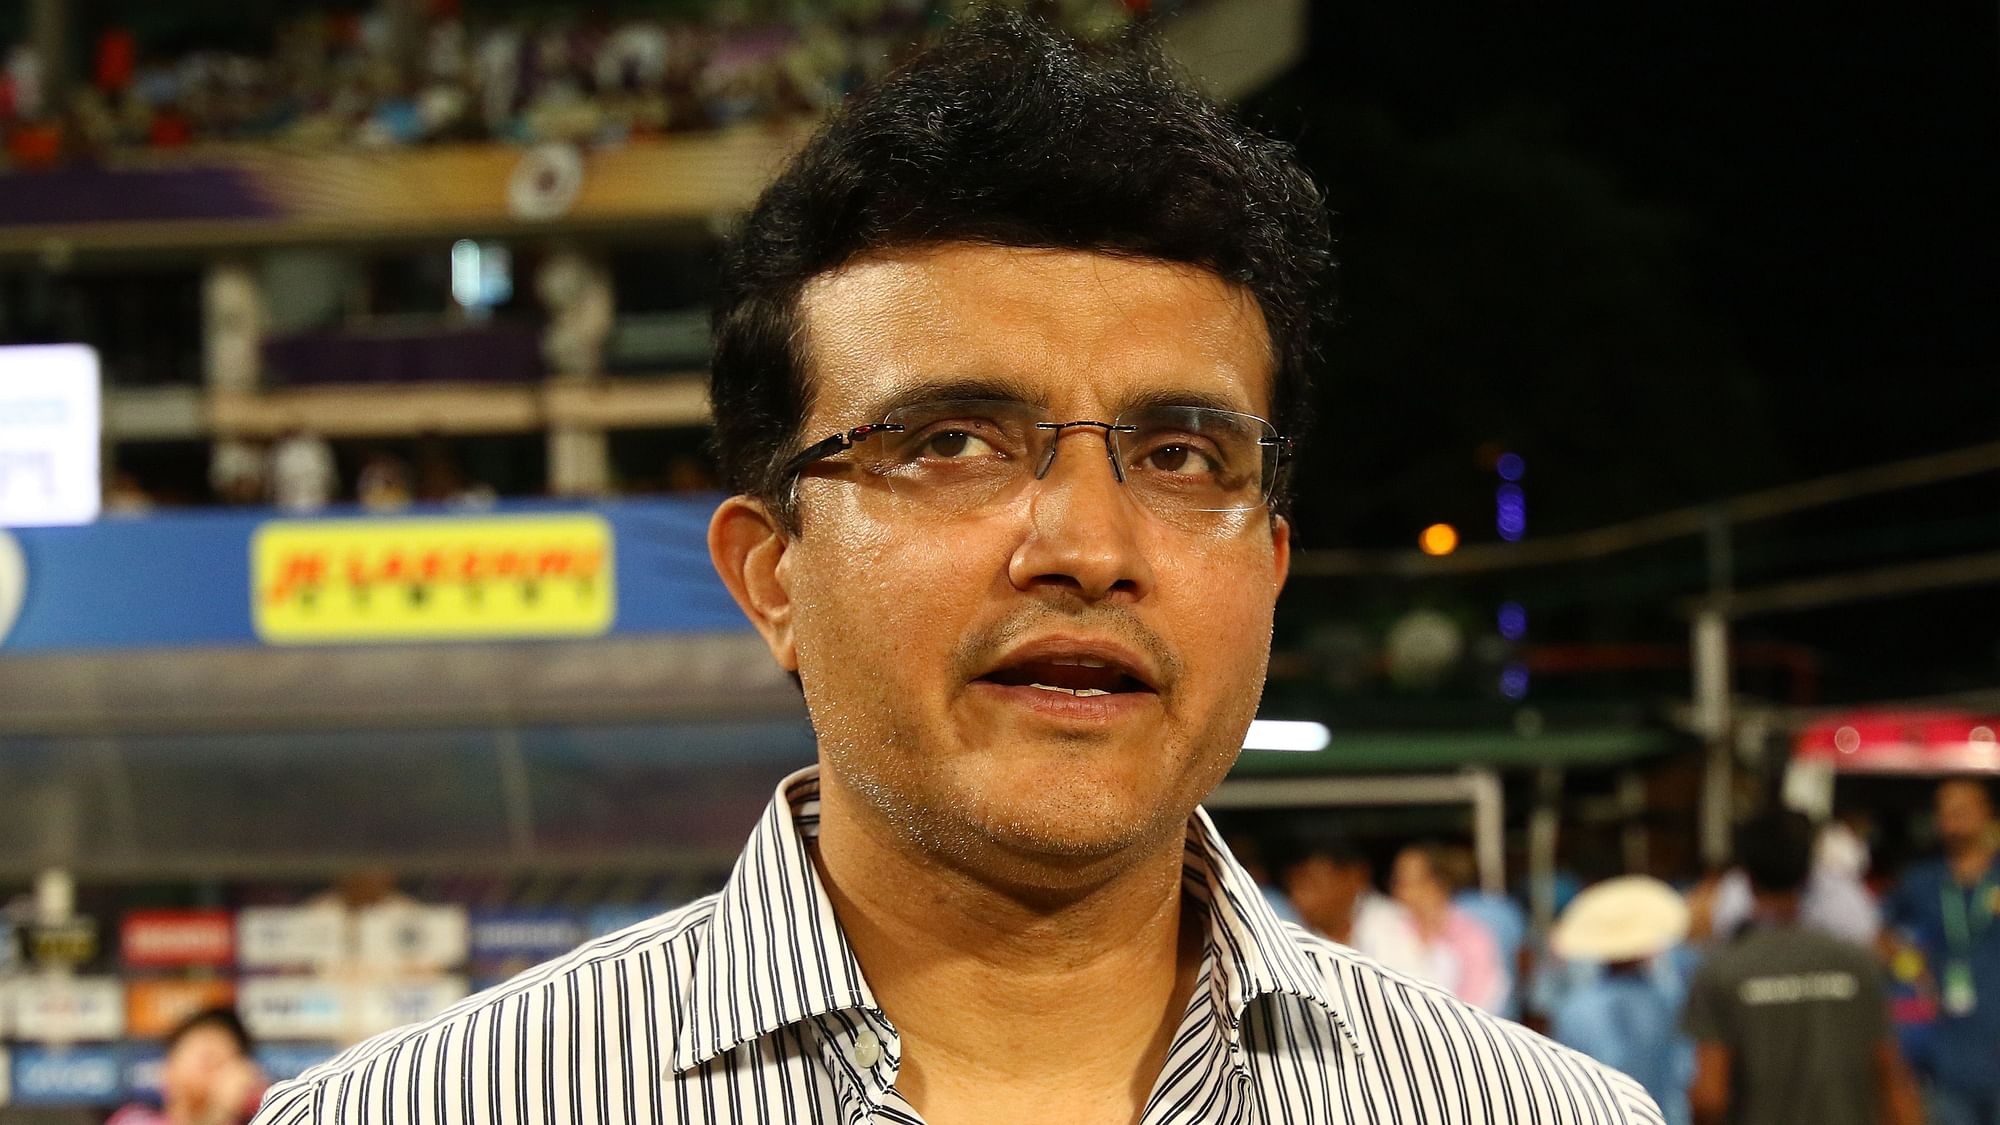 Former India captain and BCCI President Sourav Ganguly said it will be hard to find a replacement of Mahendra Singh Dhoni’s calibre.